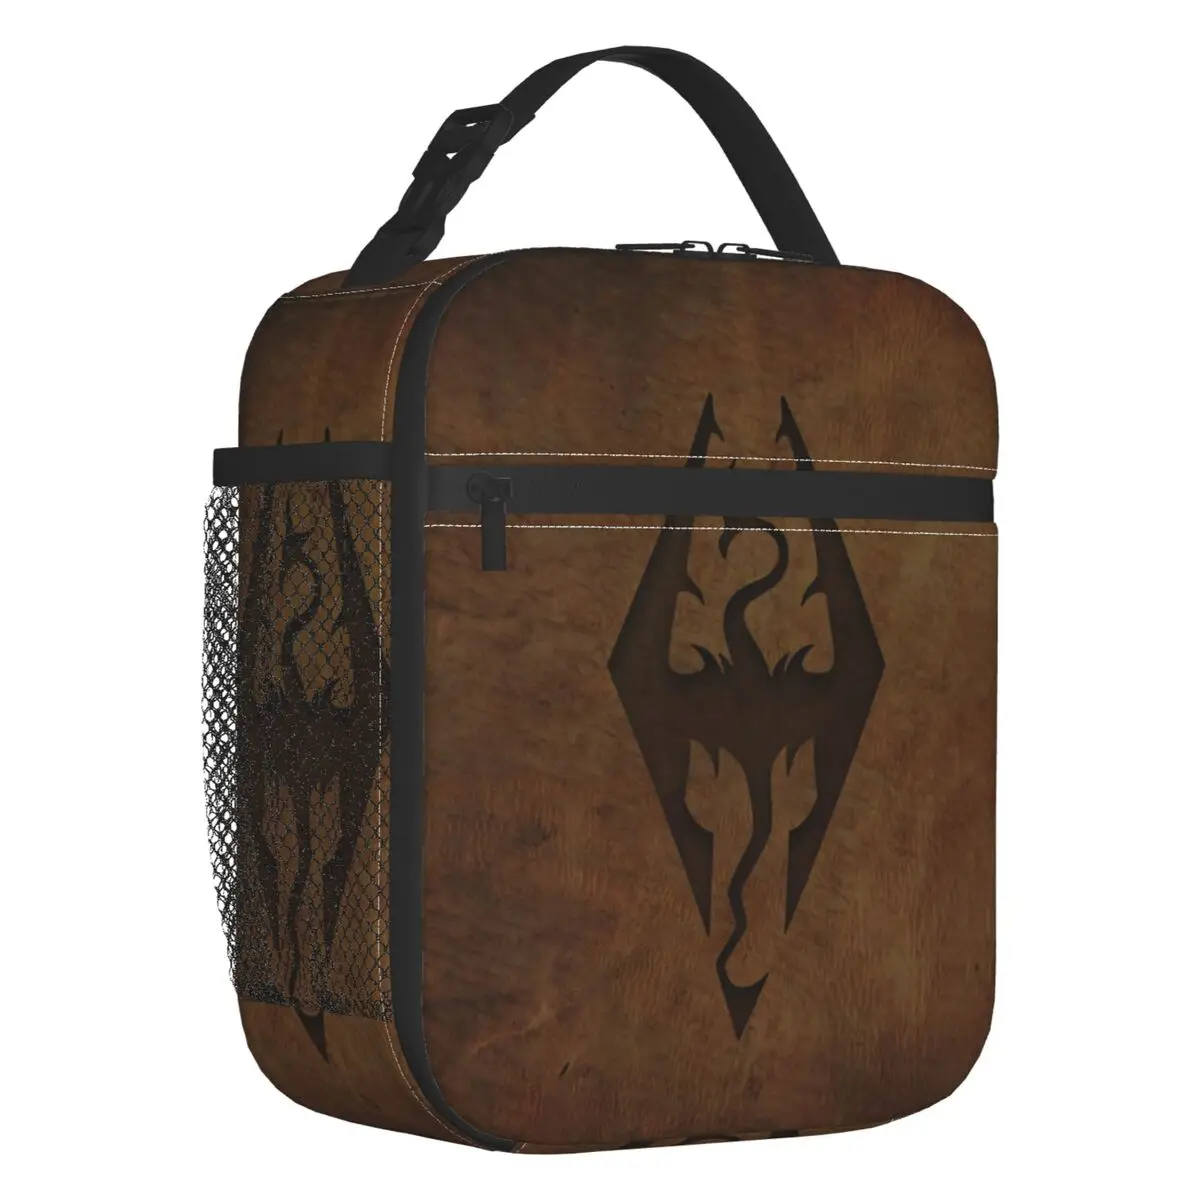 Skyrim Worn Leather Emboss Insulated Lunch Bag for Women Resuable Video Games Cooler Thermal Lunch Tote Kids School Children